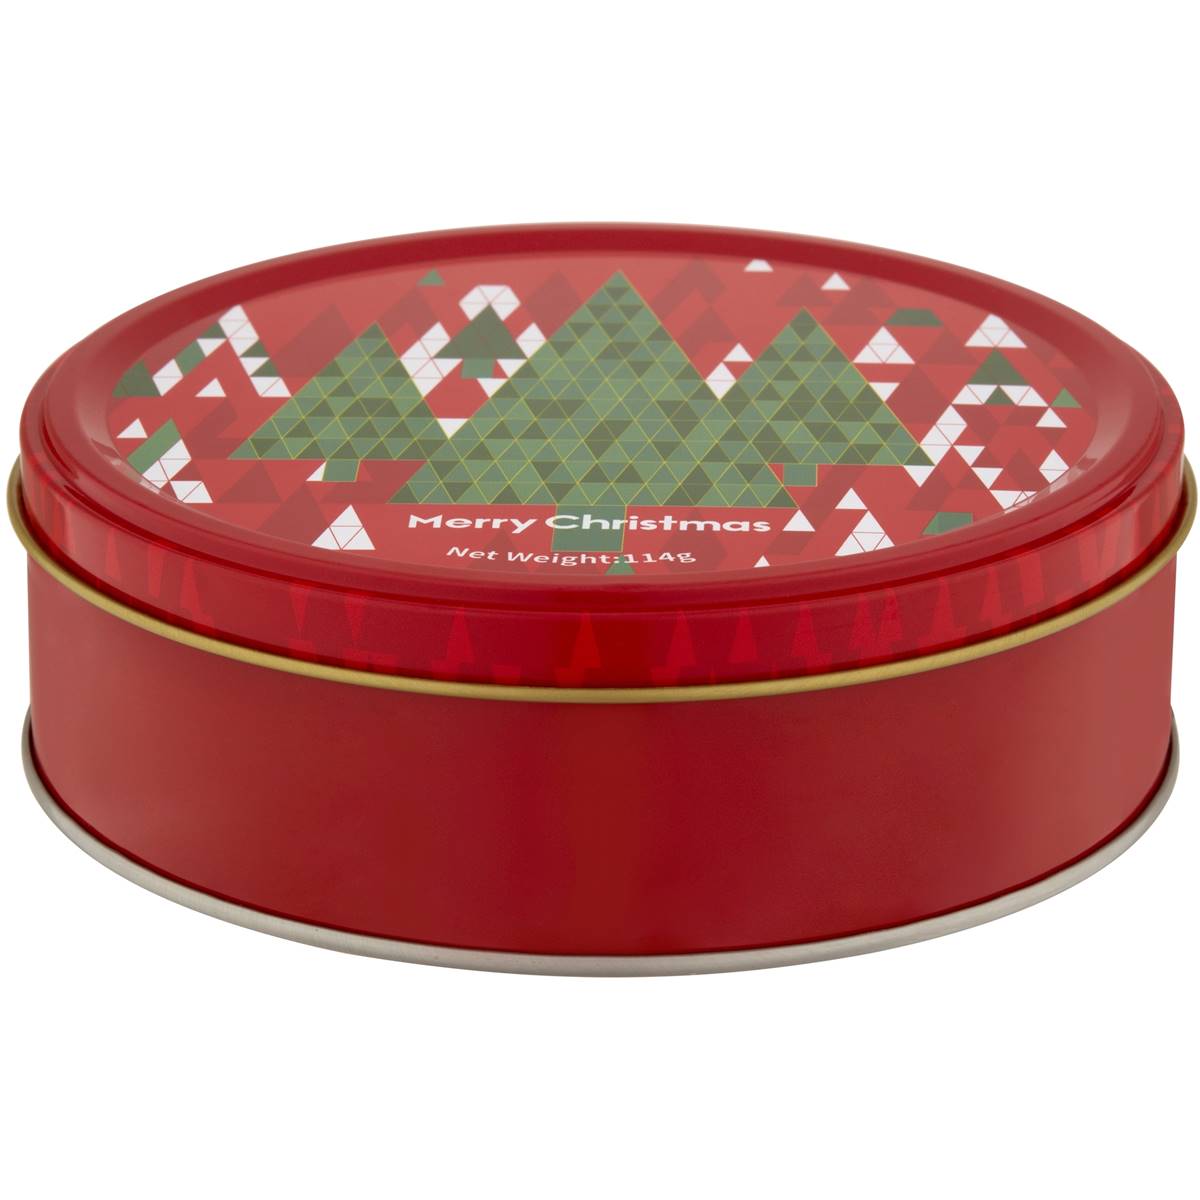 Calories in Christmas Cookie Tin